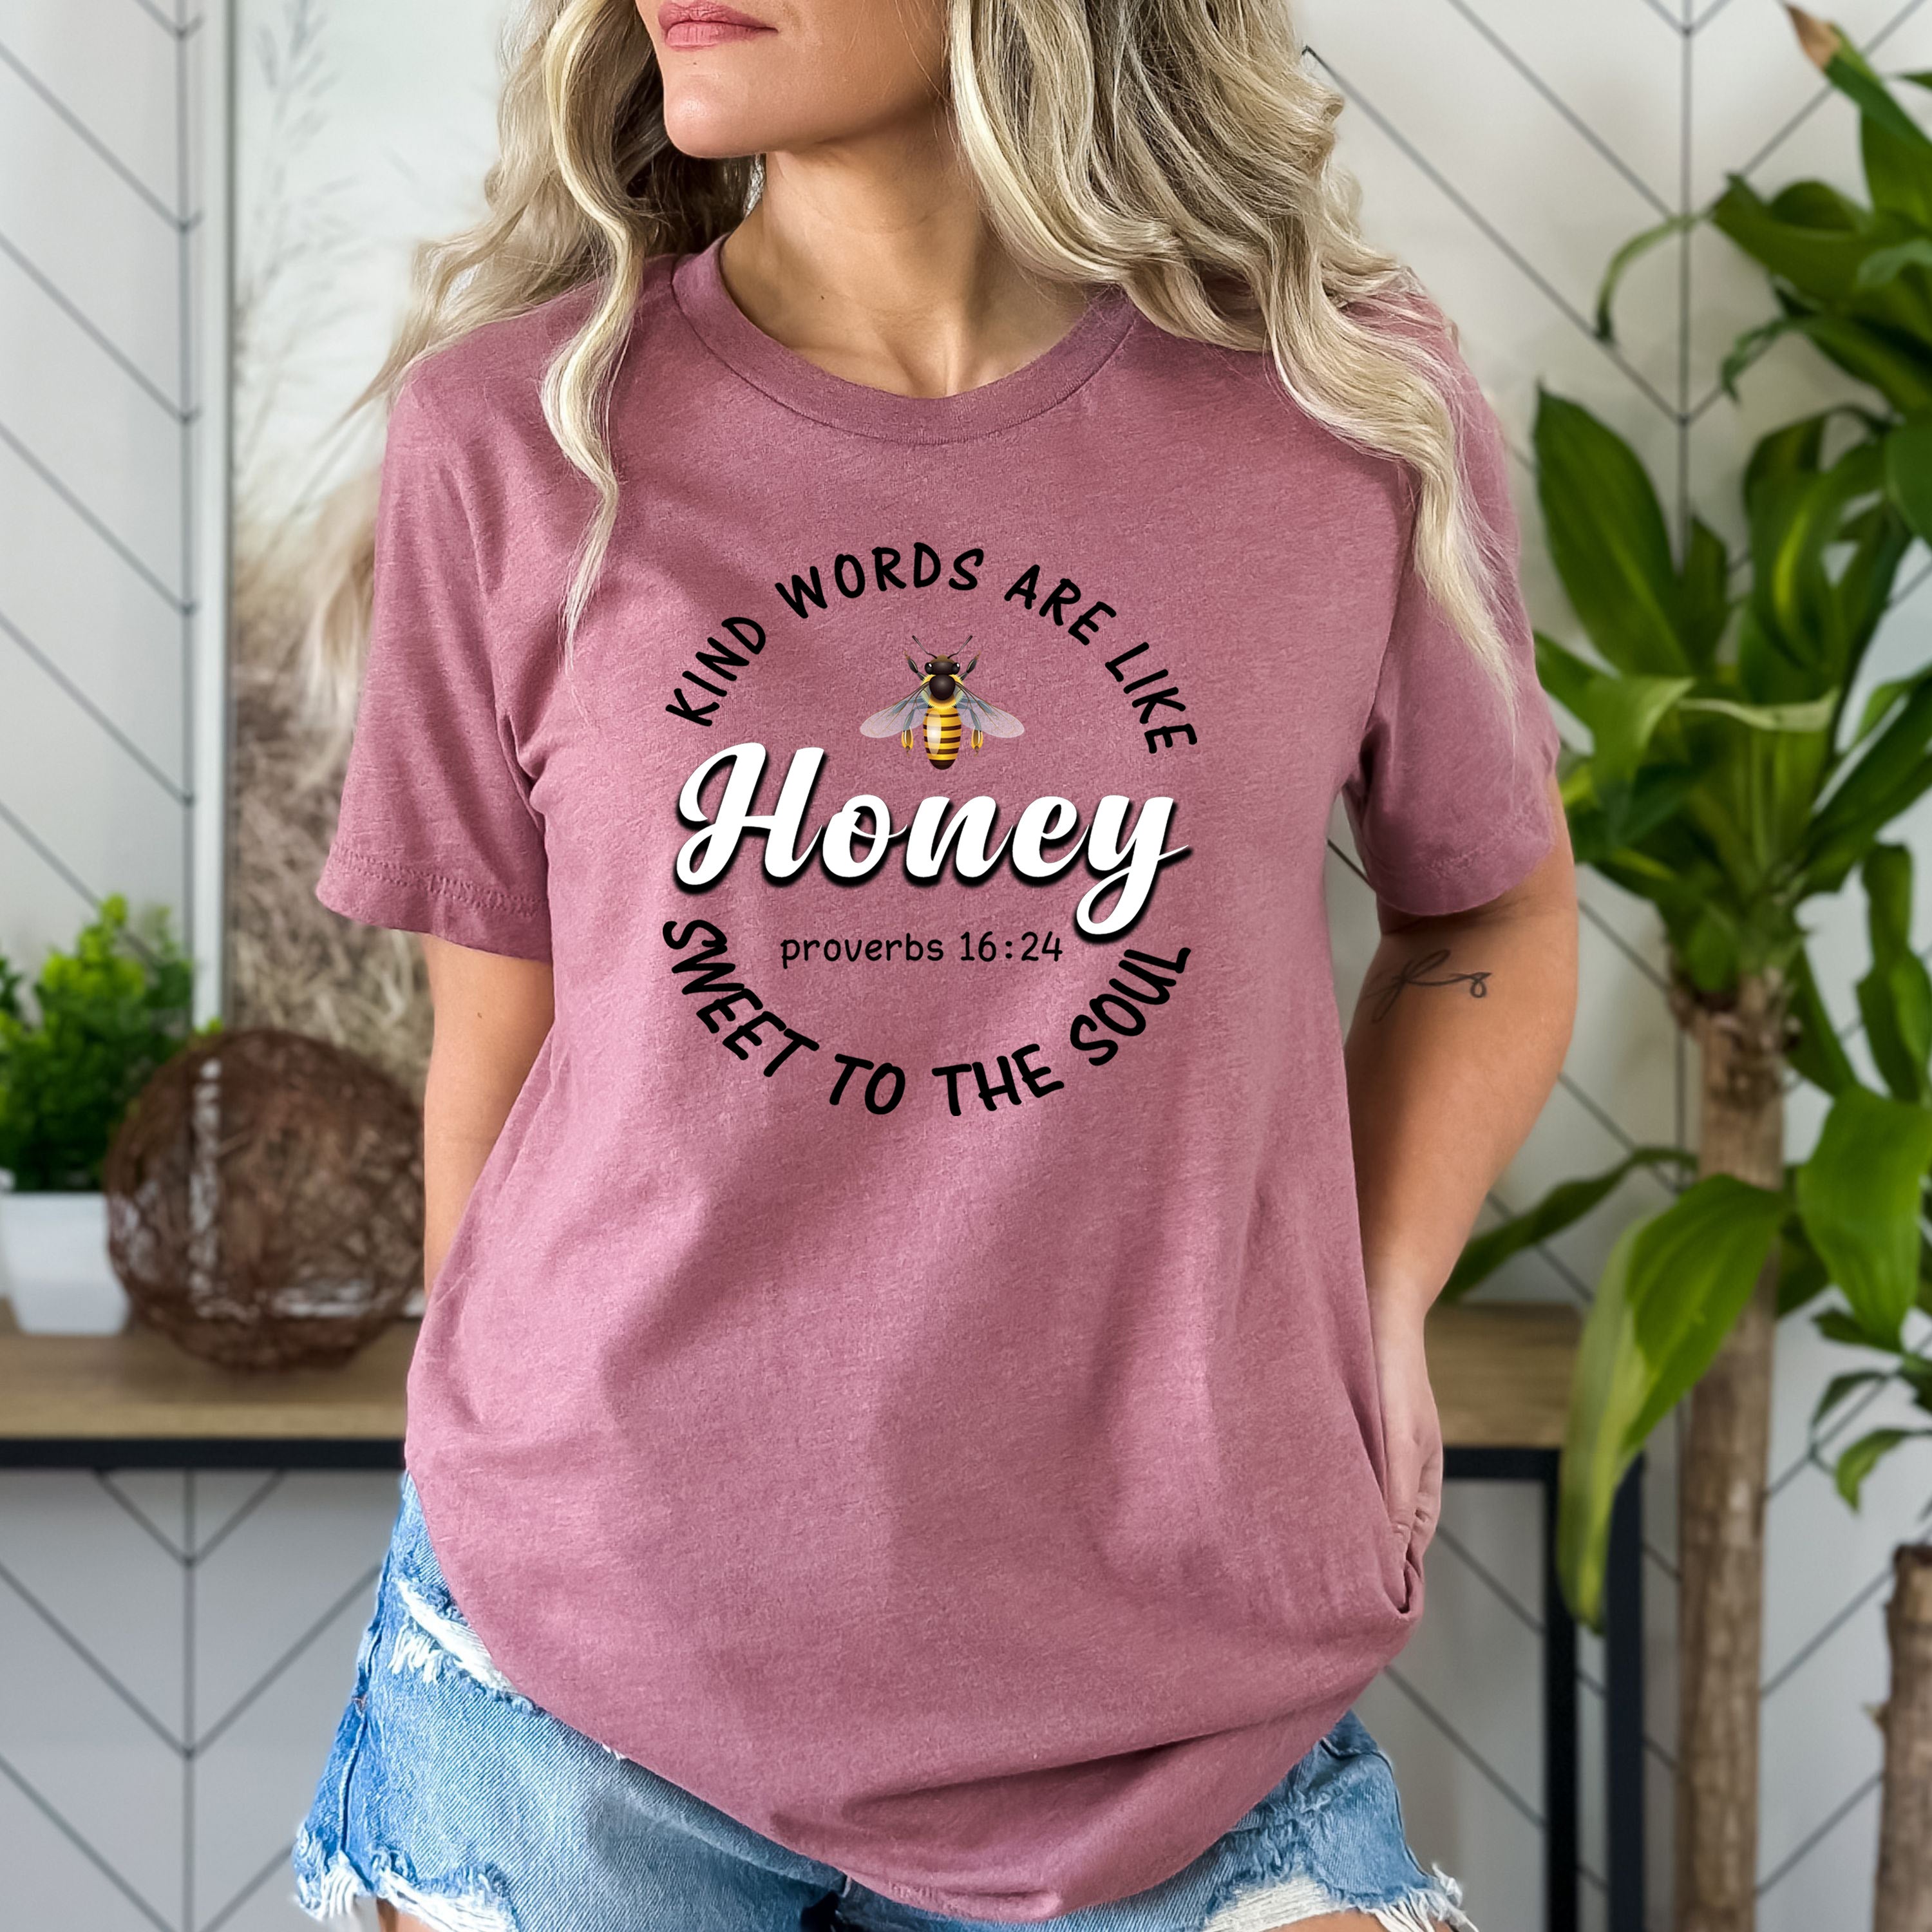 Kind Words Are Like Honey - Bella canvas